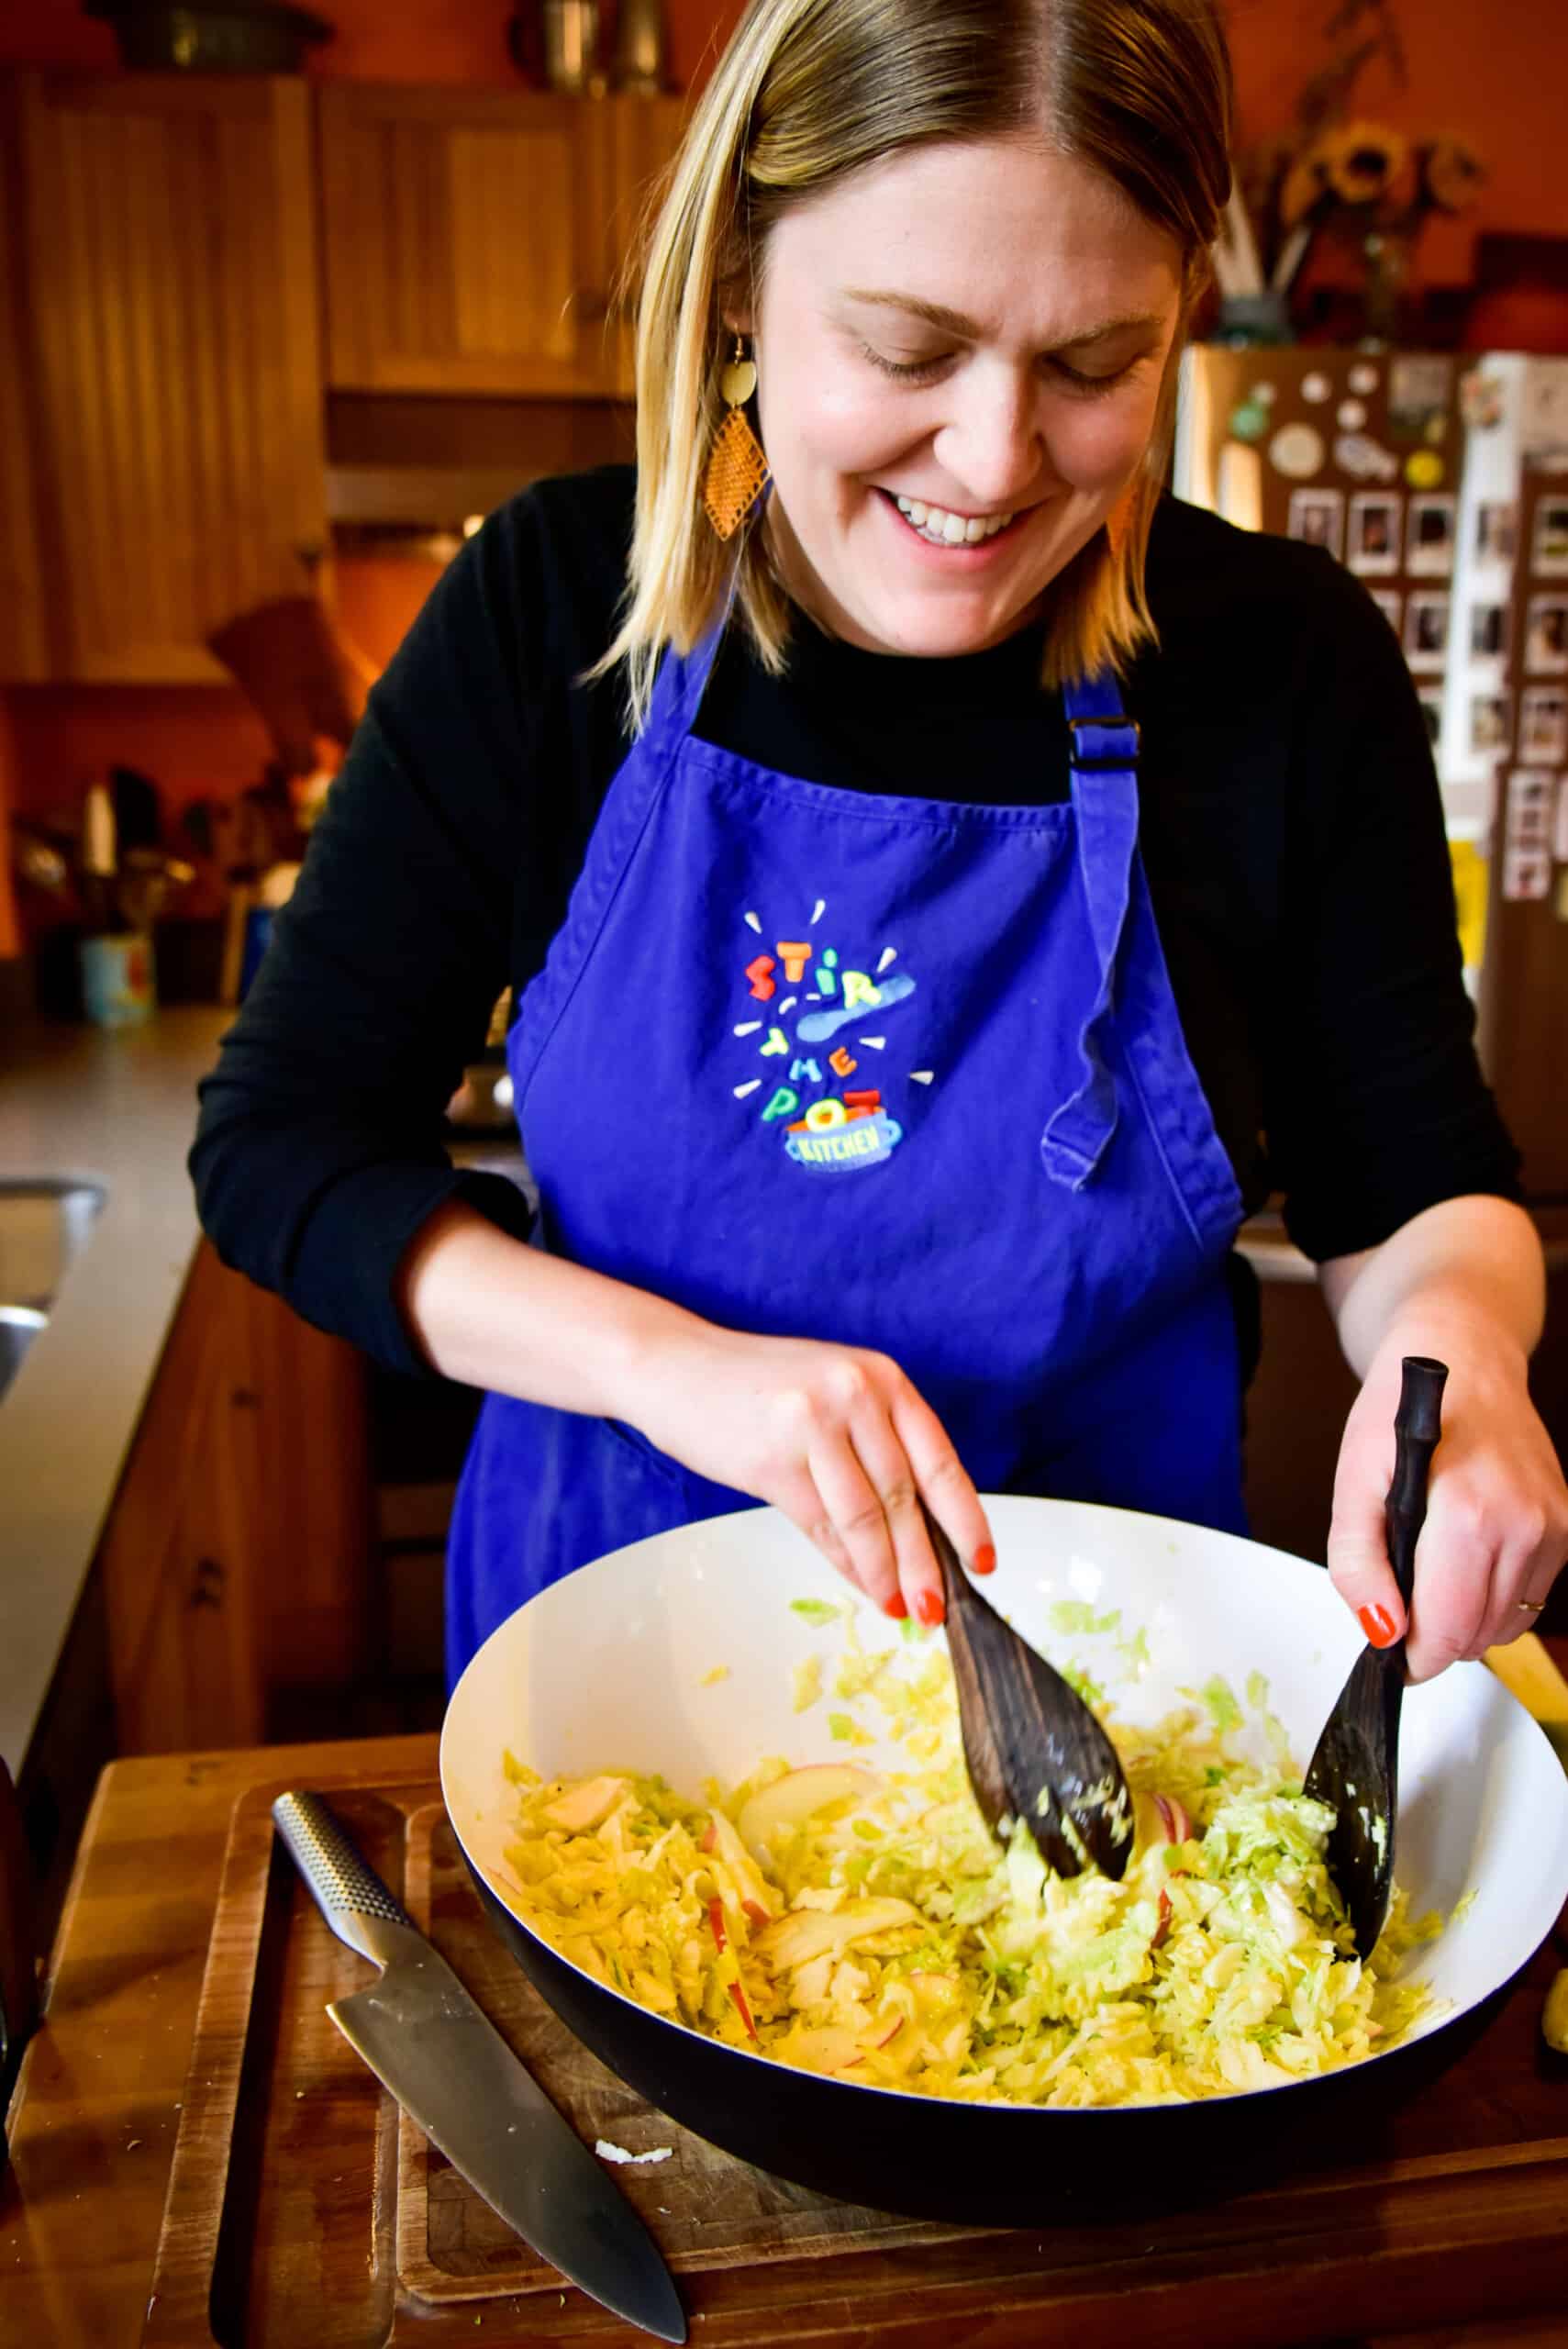 Woman with mid-length blond hair, wearing a blue apron, tosses a salad in a big salad bowl. 